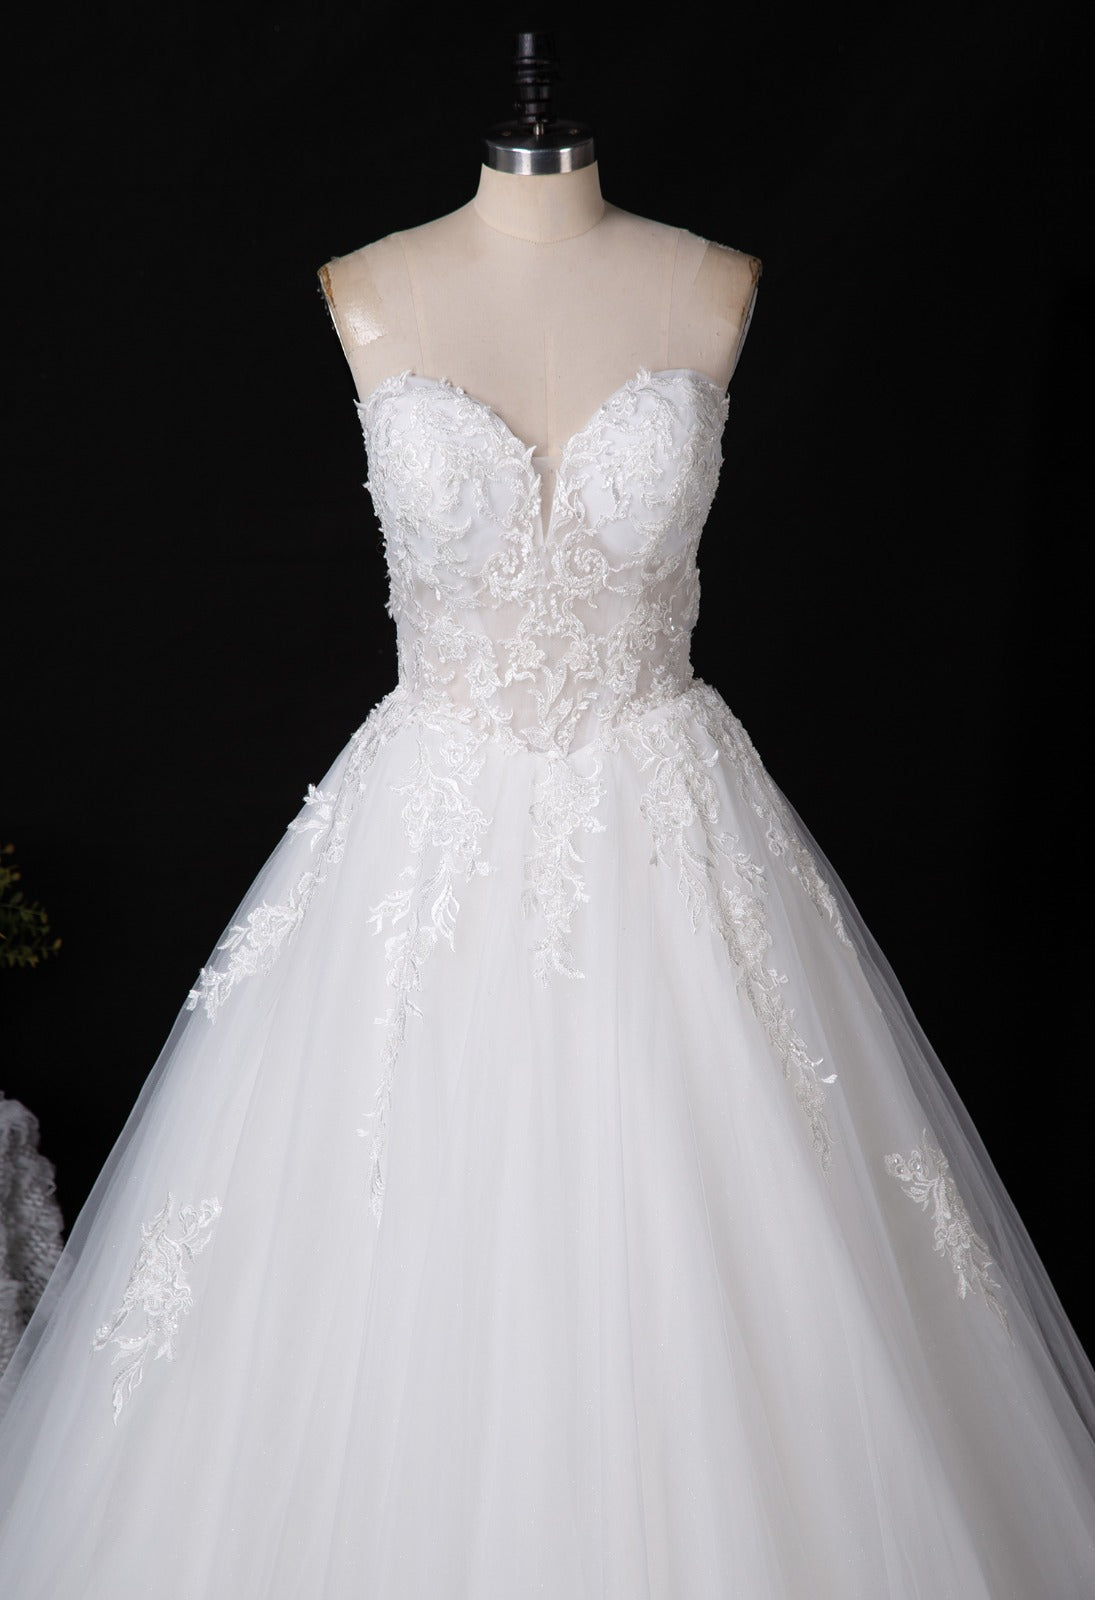 Belle 2279 Princess Ballgown Sweetheart Lace Wedding Dress in Ivory